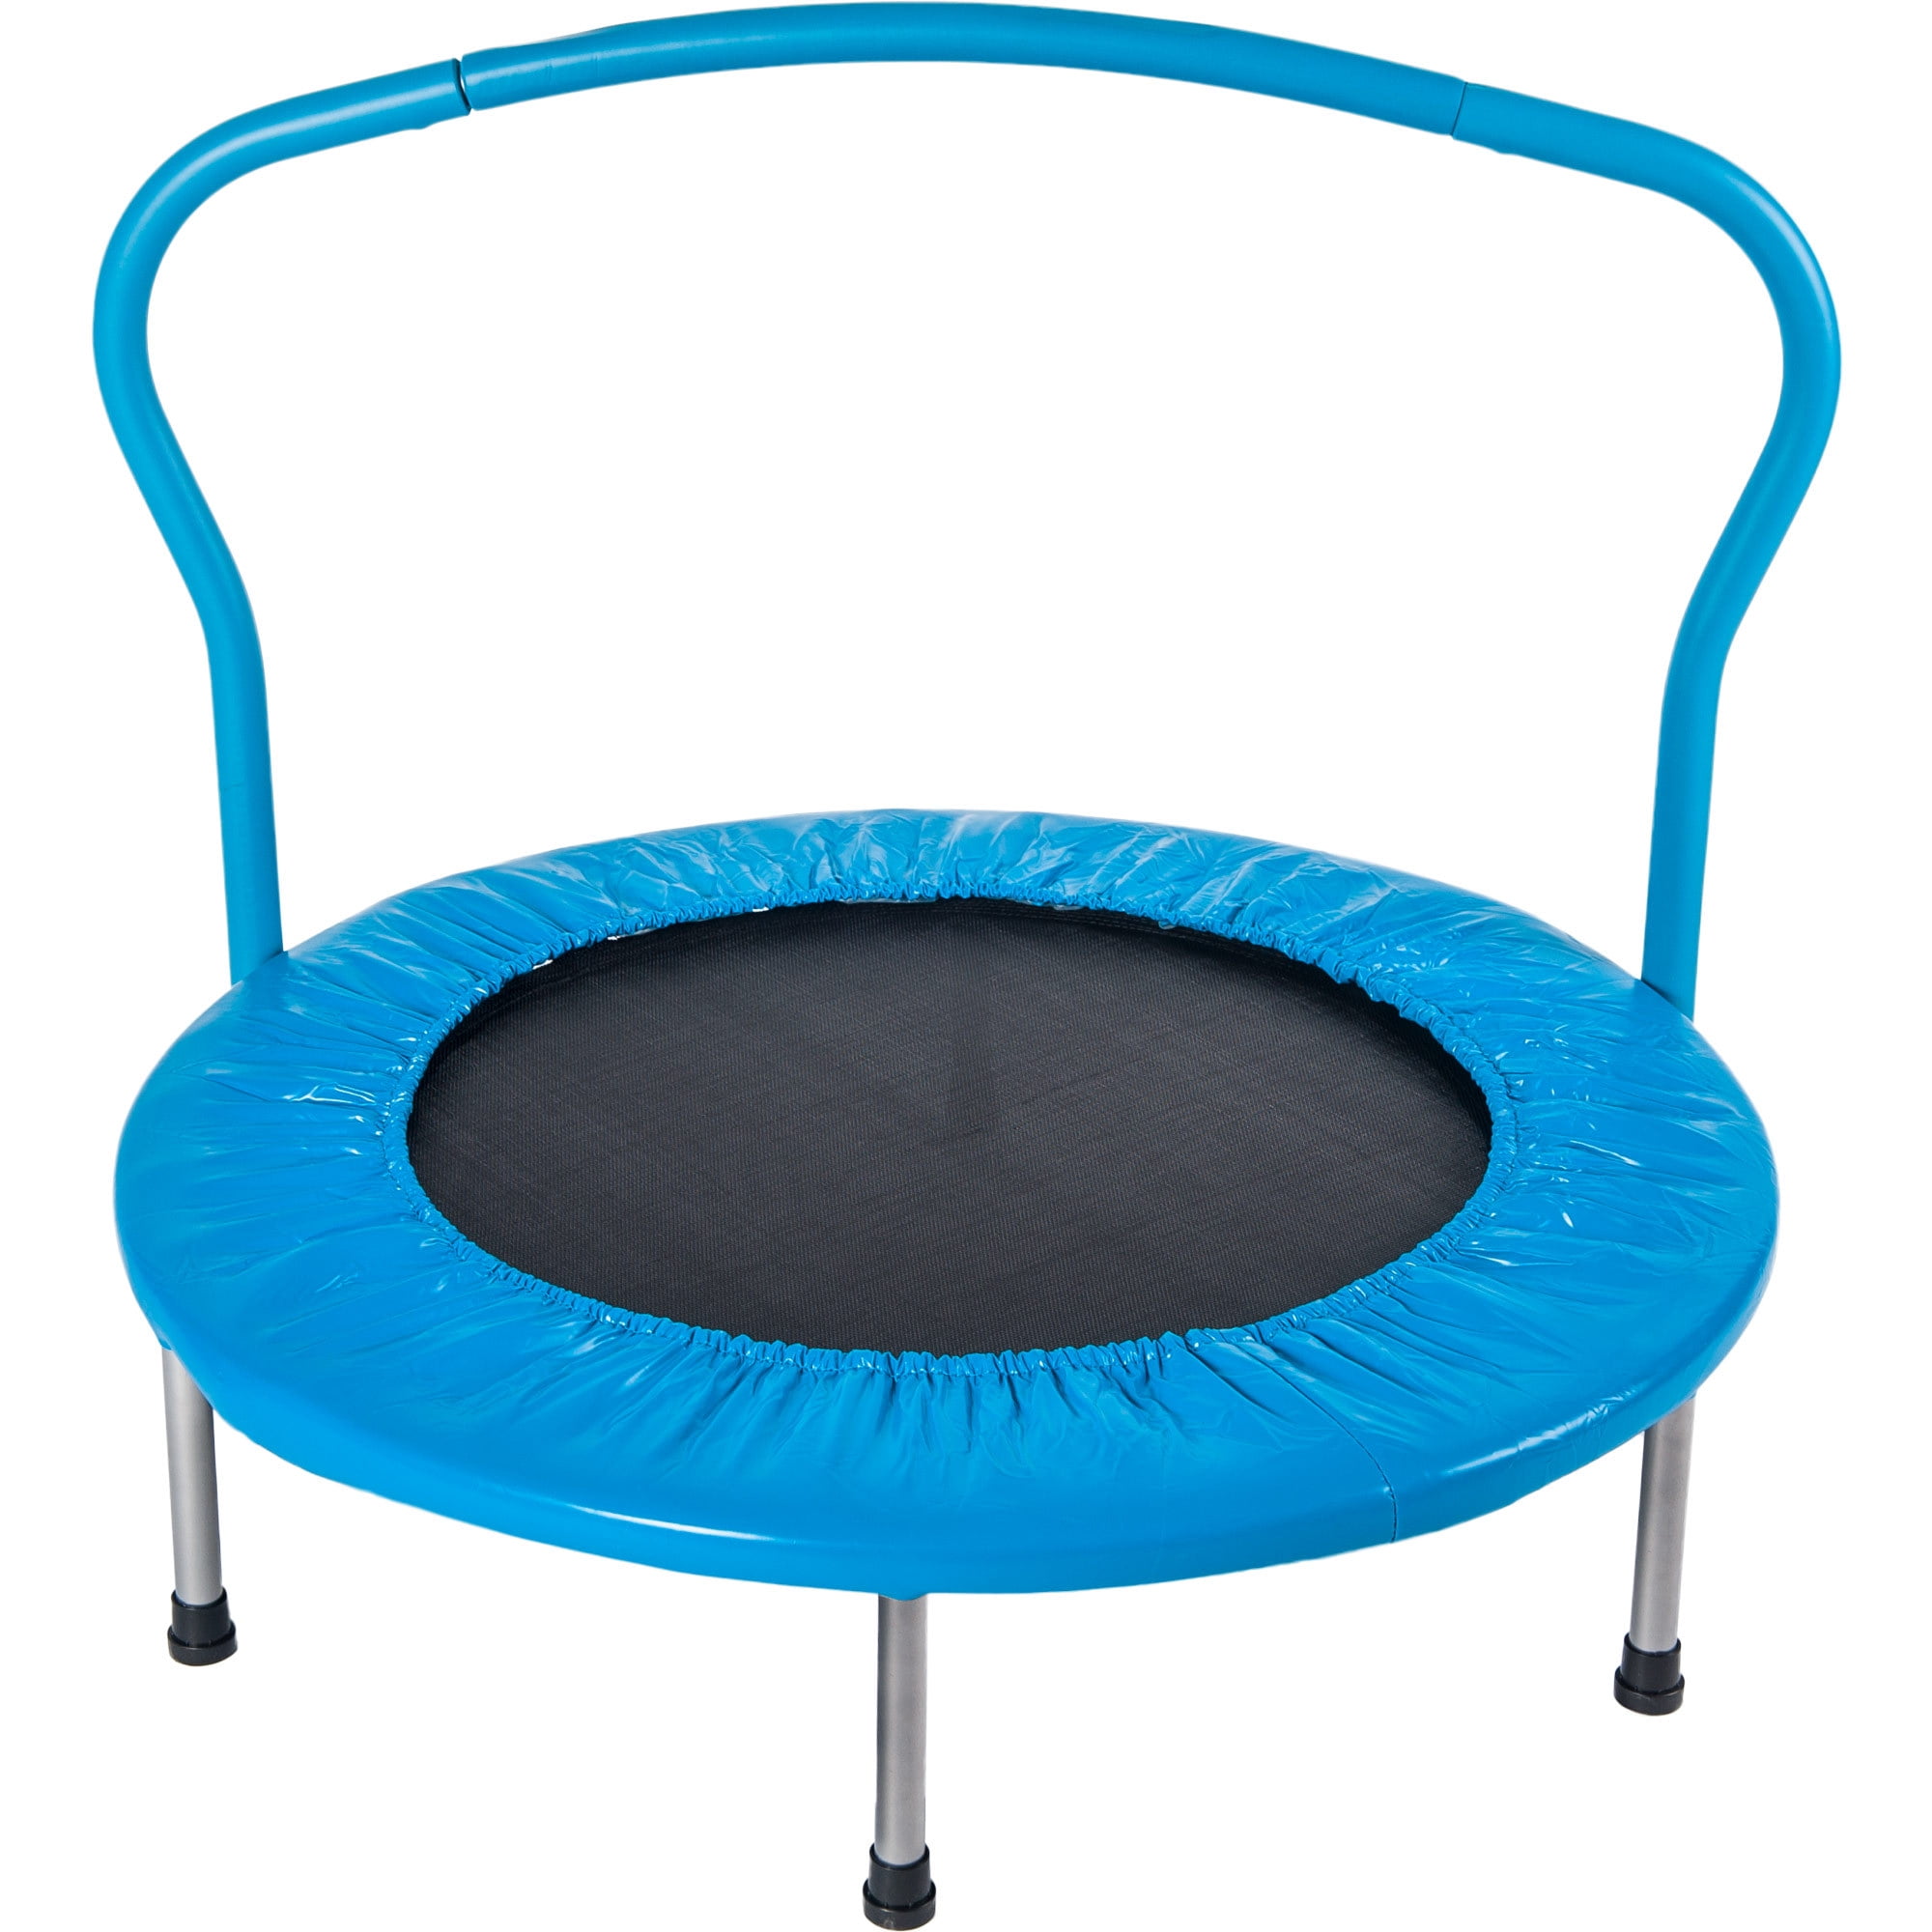 36" Kids Trampoline with Handrail Safety Padded Cover For Indoor/Outdoor Cardio 